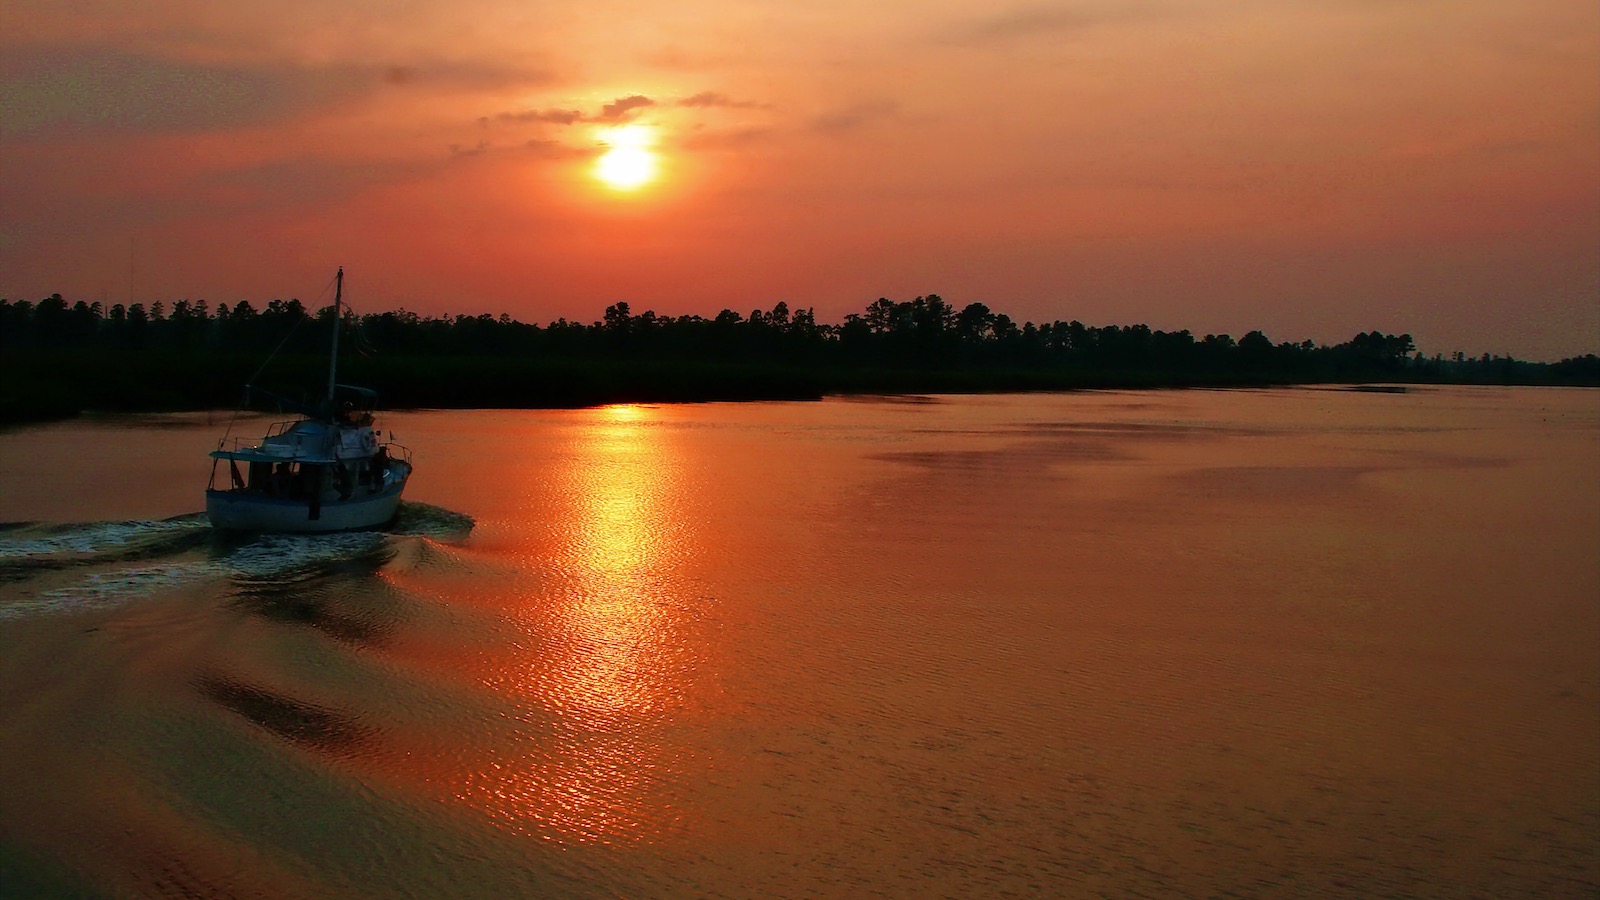 A fishing boat in silhouette heads up the Cape Fear River as sunse casts a golden glow over the water.